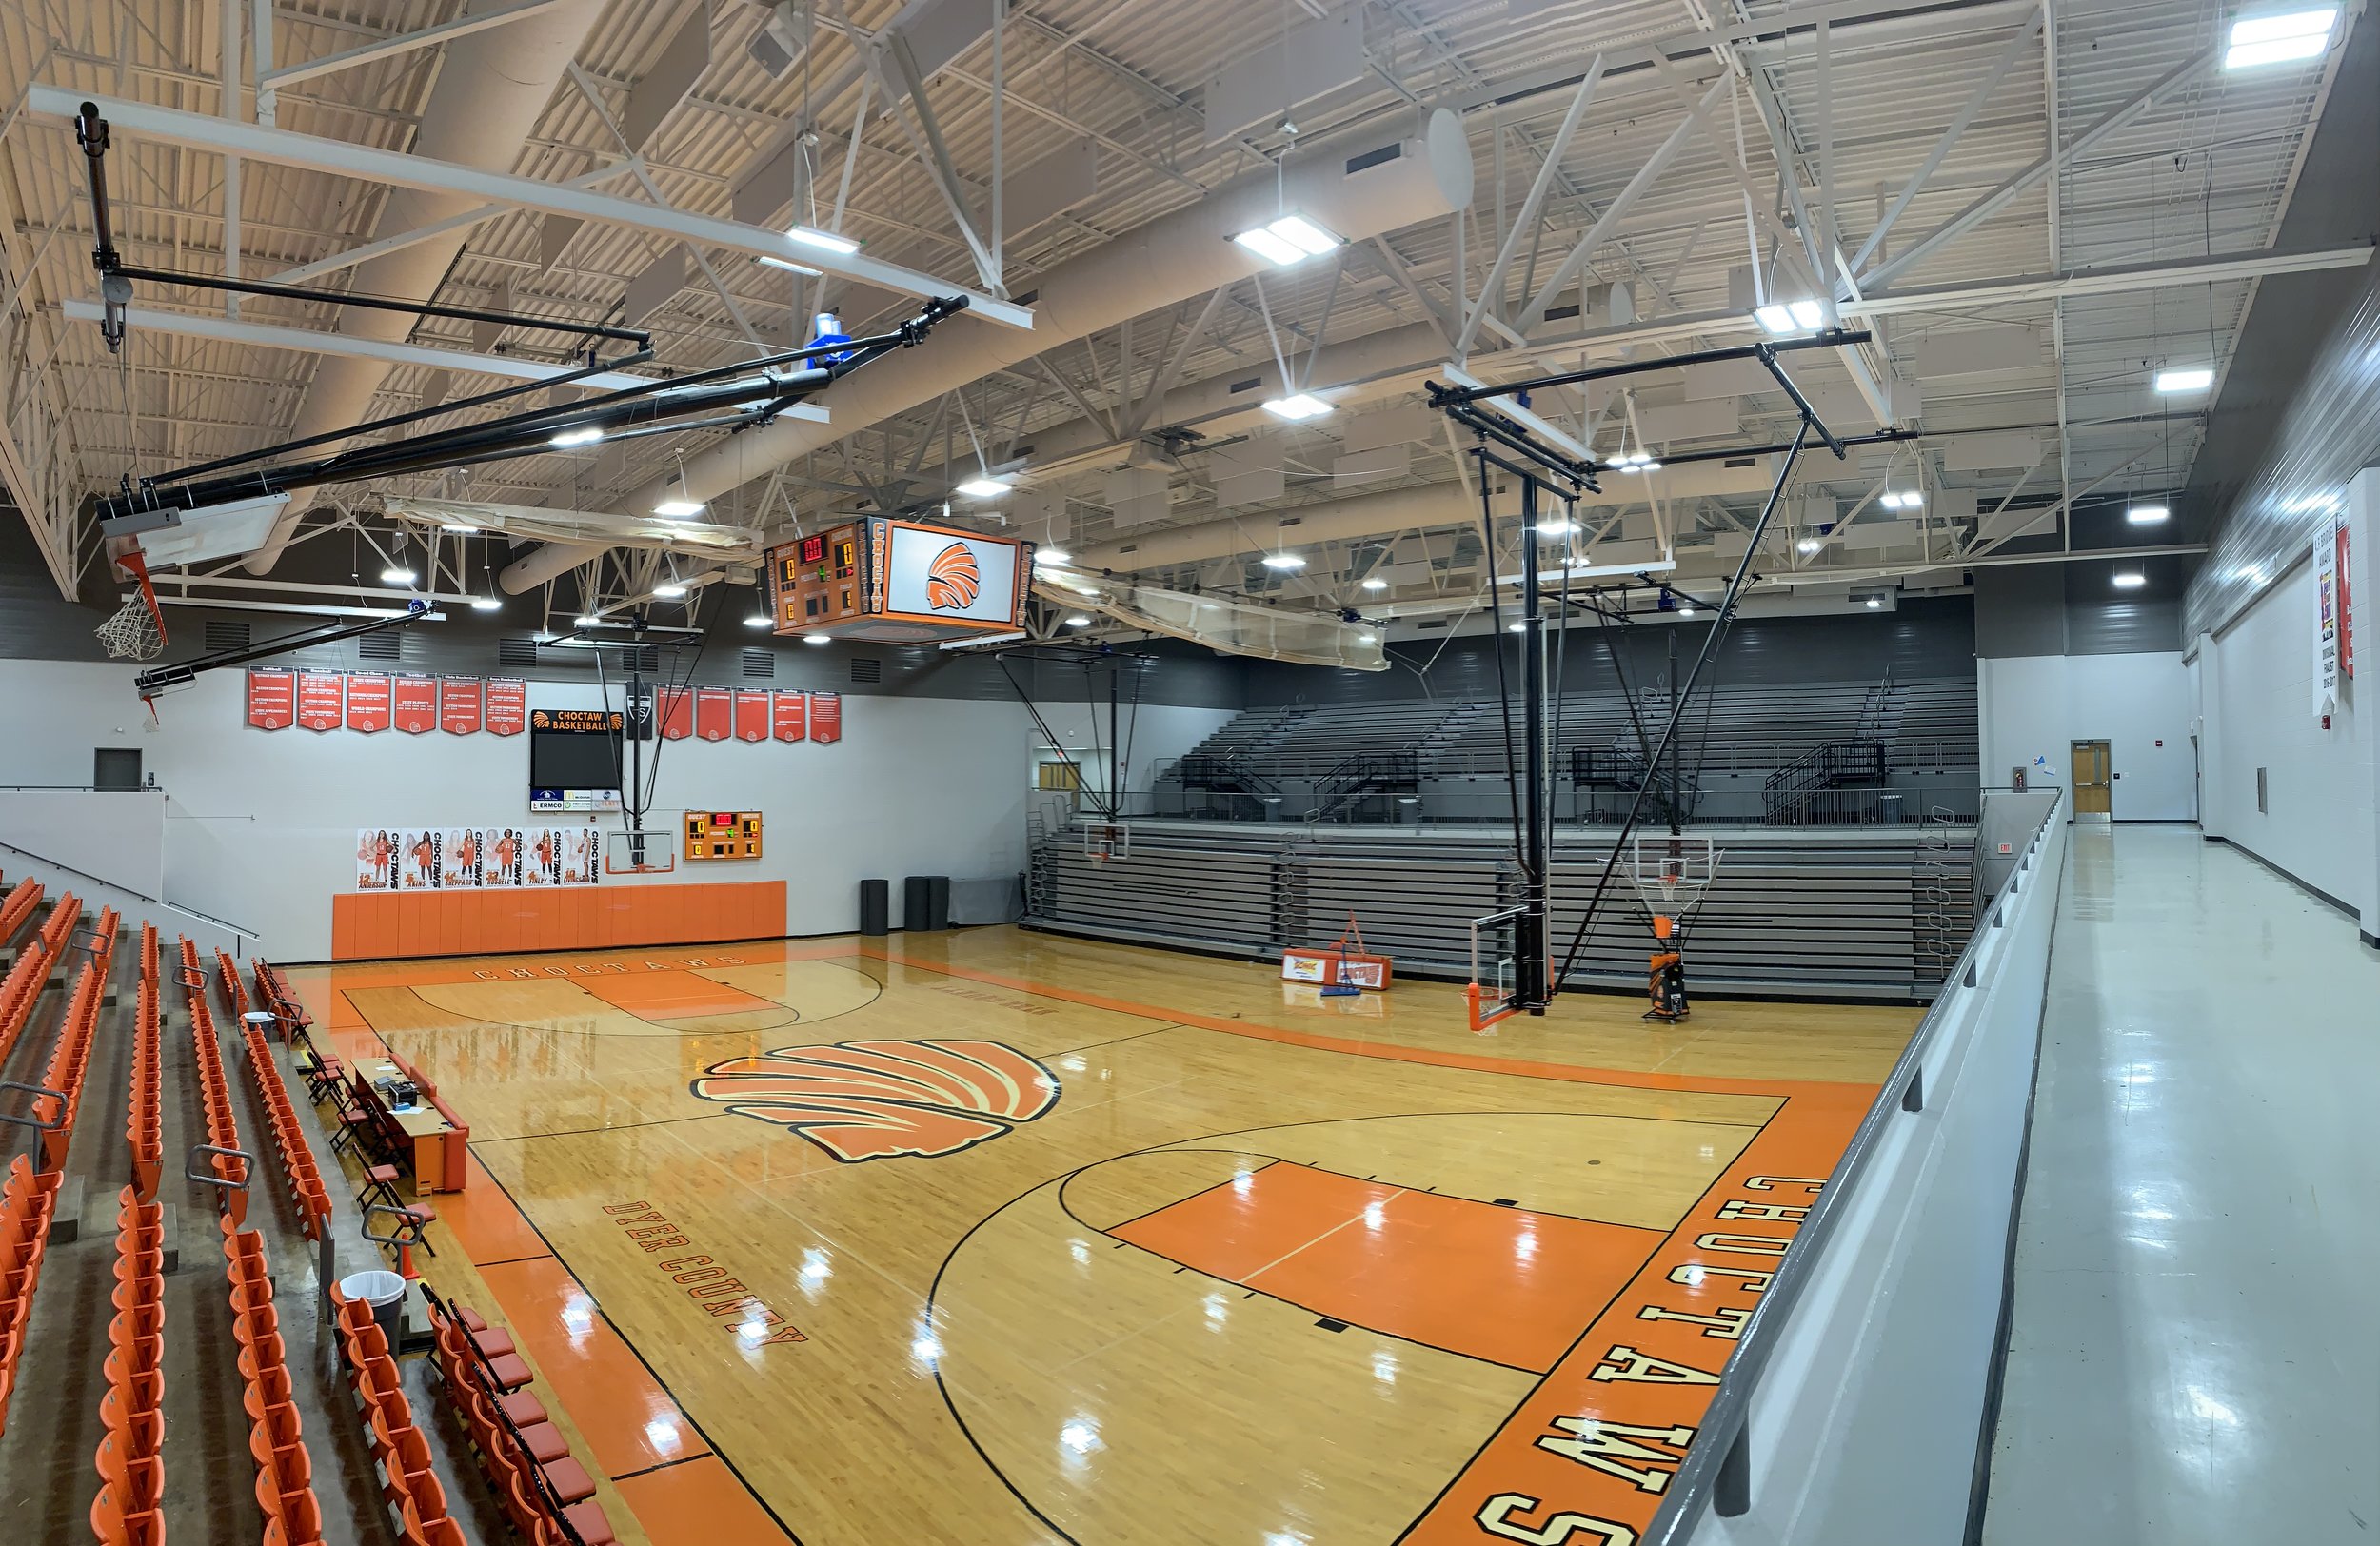  Educational: Dyer County High School Gym Re-light  Architect: MNB Architects  Photography: HNA Engineering 